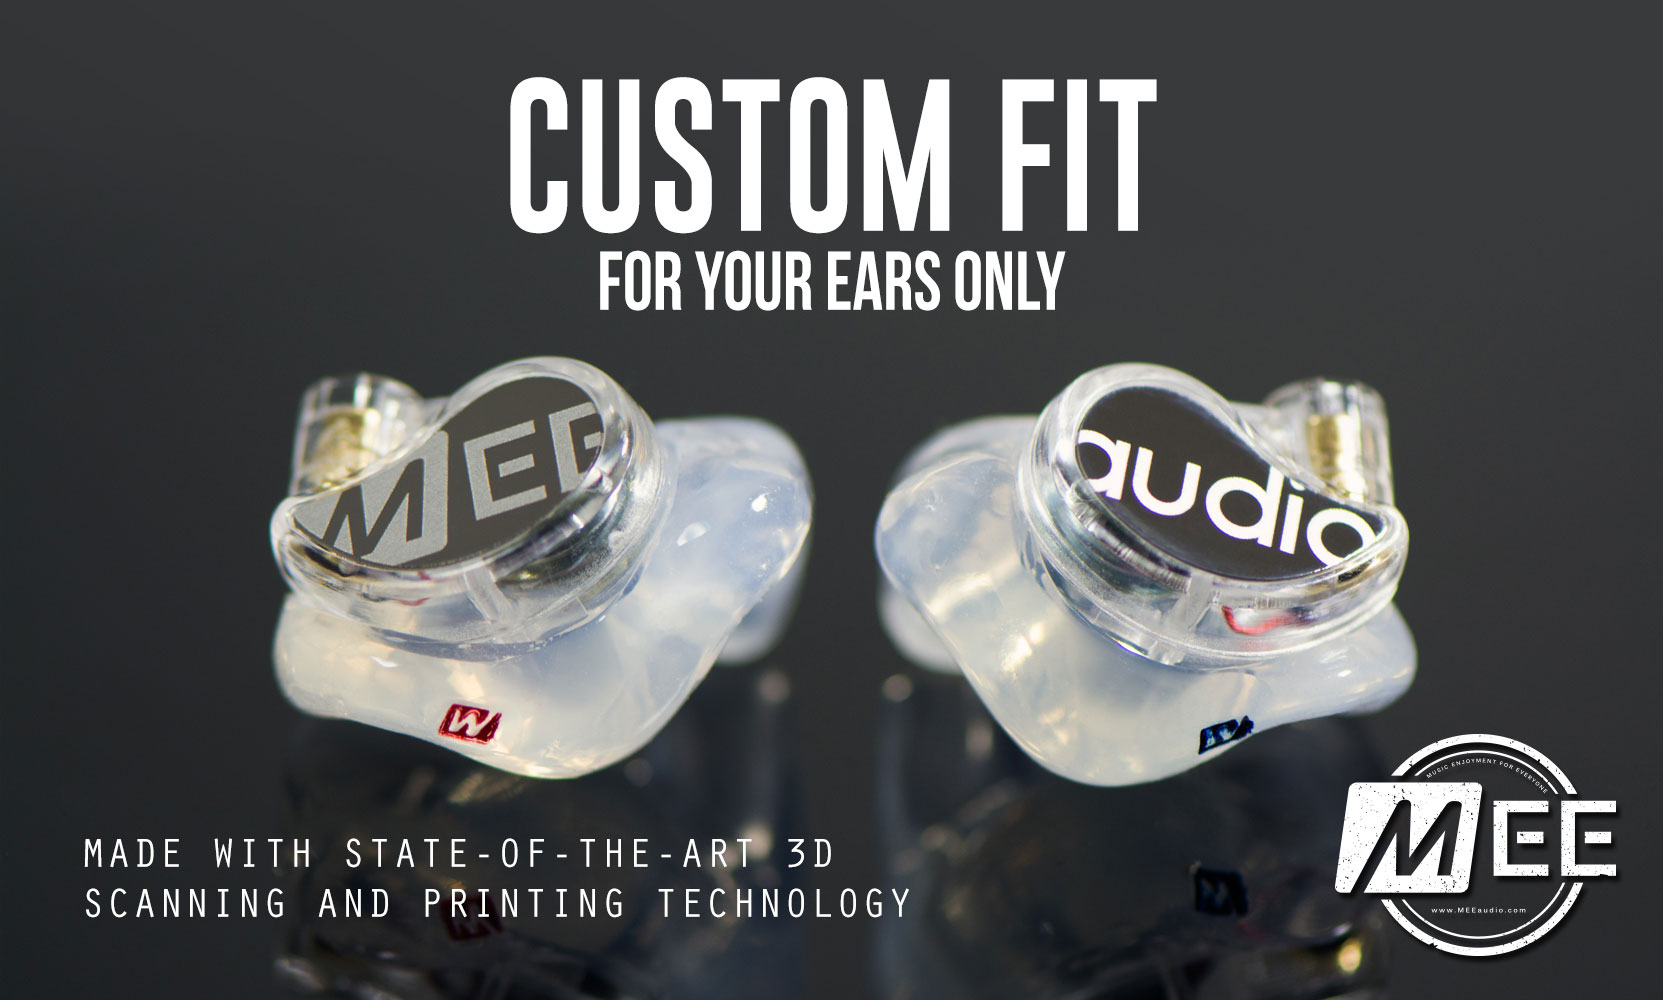 Custom M6 PRO 2nd generation in-ear monitors with custom eartips, logo faceplates, and a caption that reads For Your Ears Only